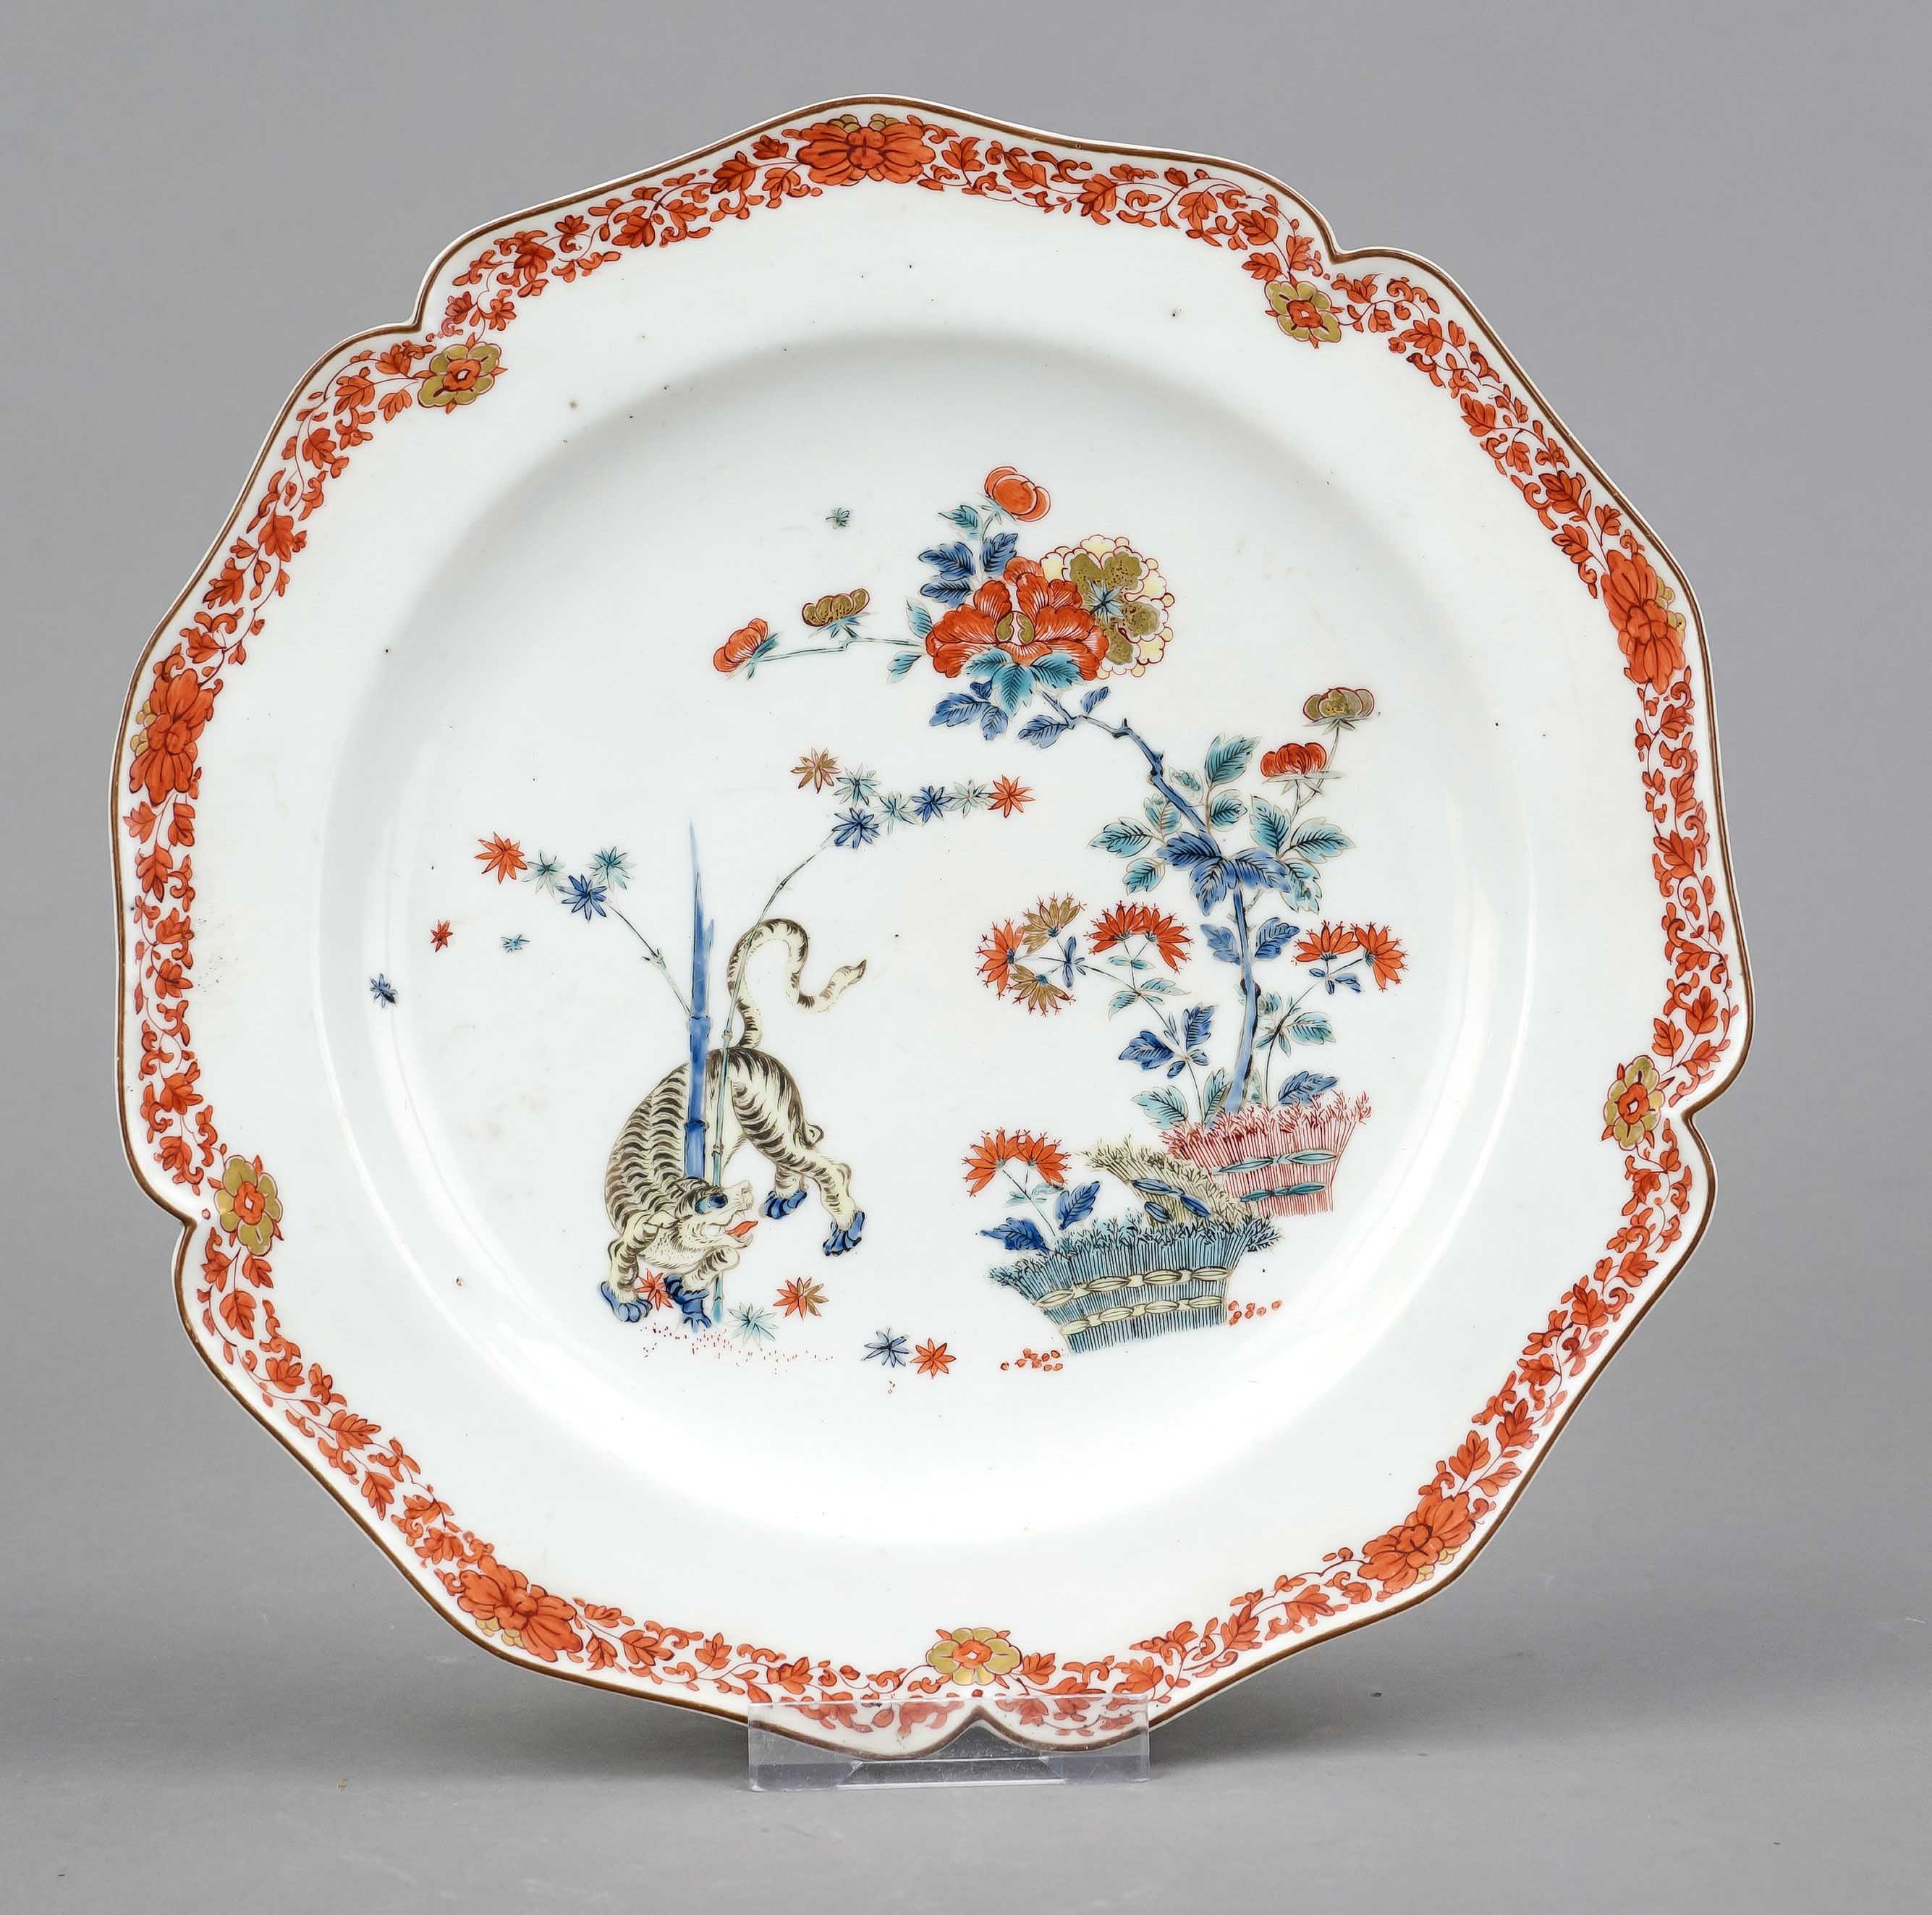 Plate, w. Chelsea or Bow, England, 18th century, curved form, polychrome Kakiemon painting in enamel